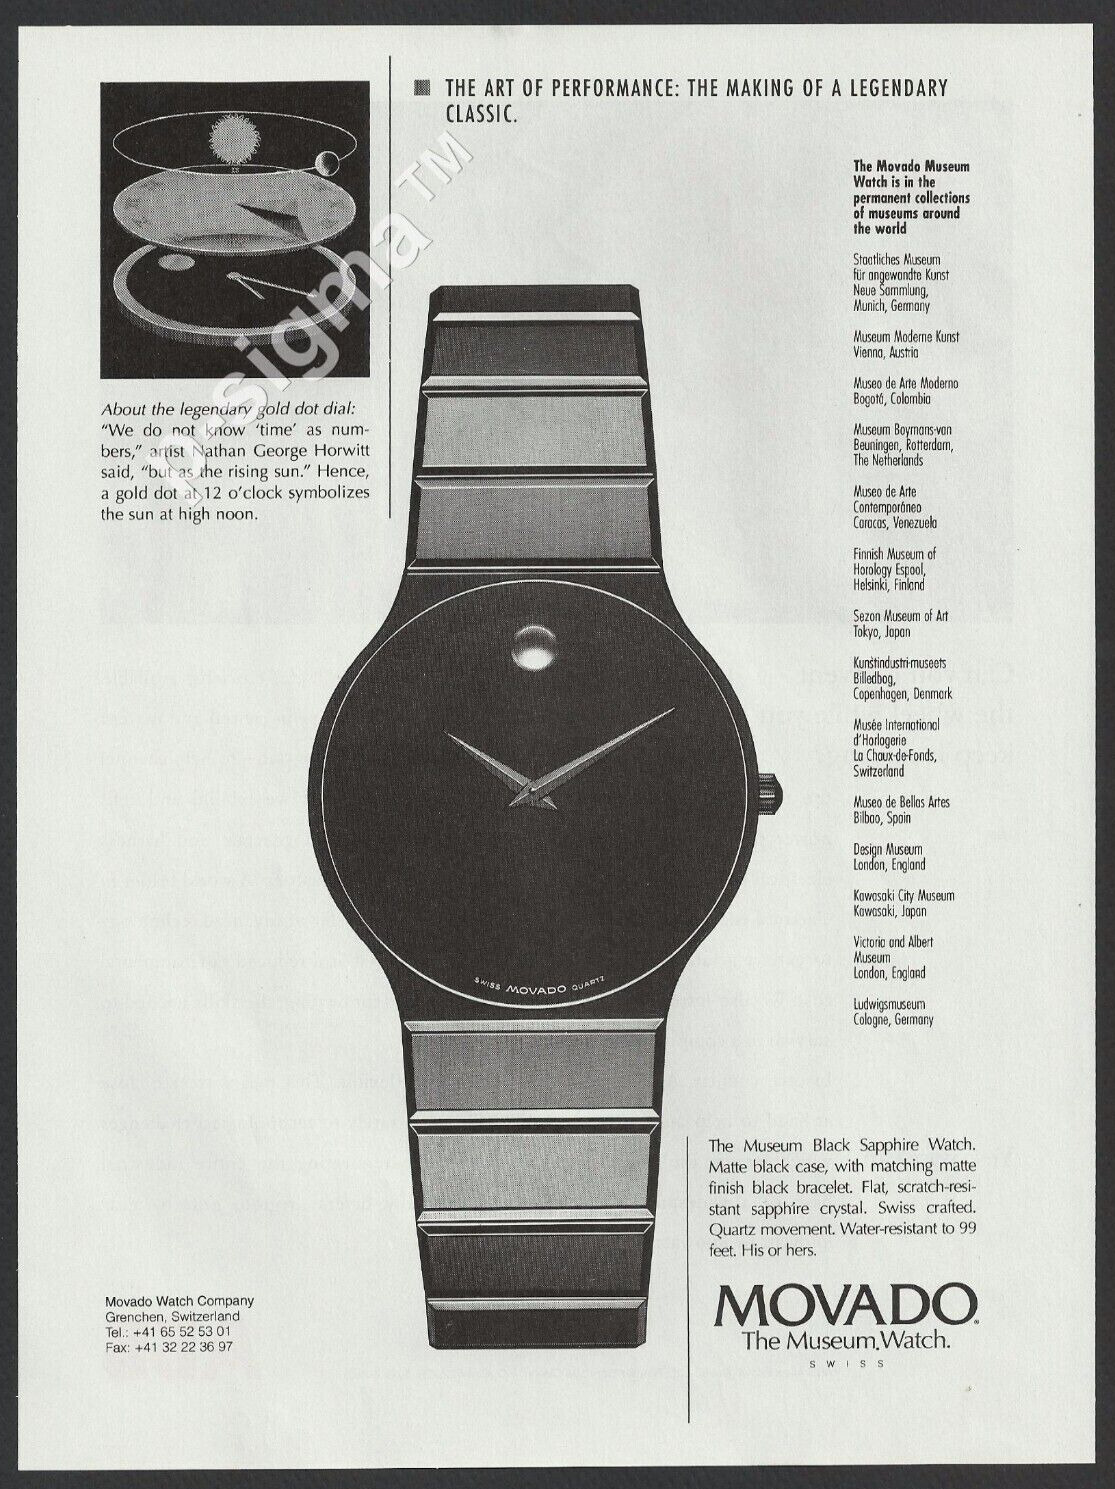 MOVADO The Museum Watch. The Making of a Legendary Classic-1995 Vintage Print Ad